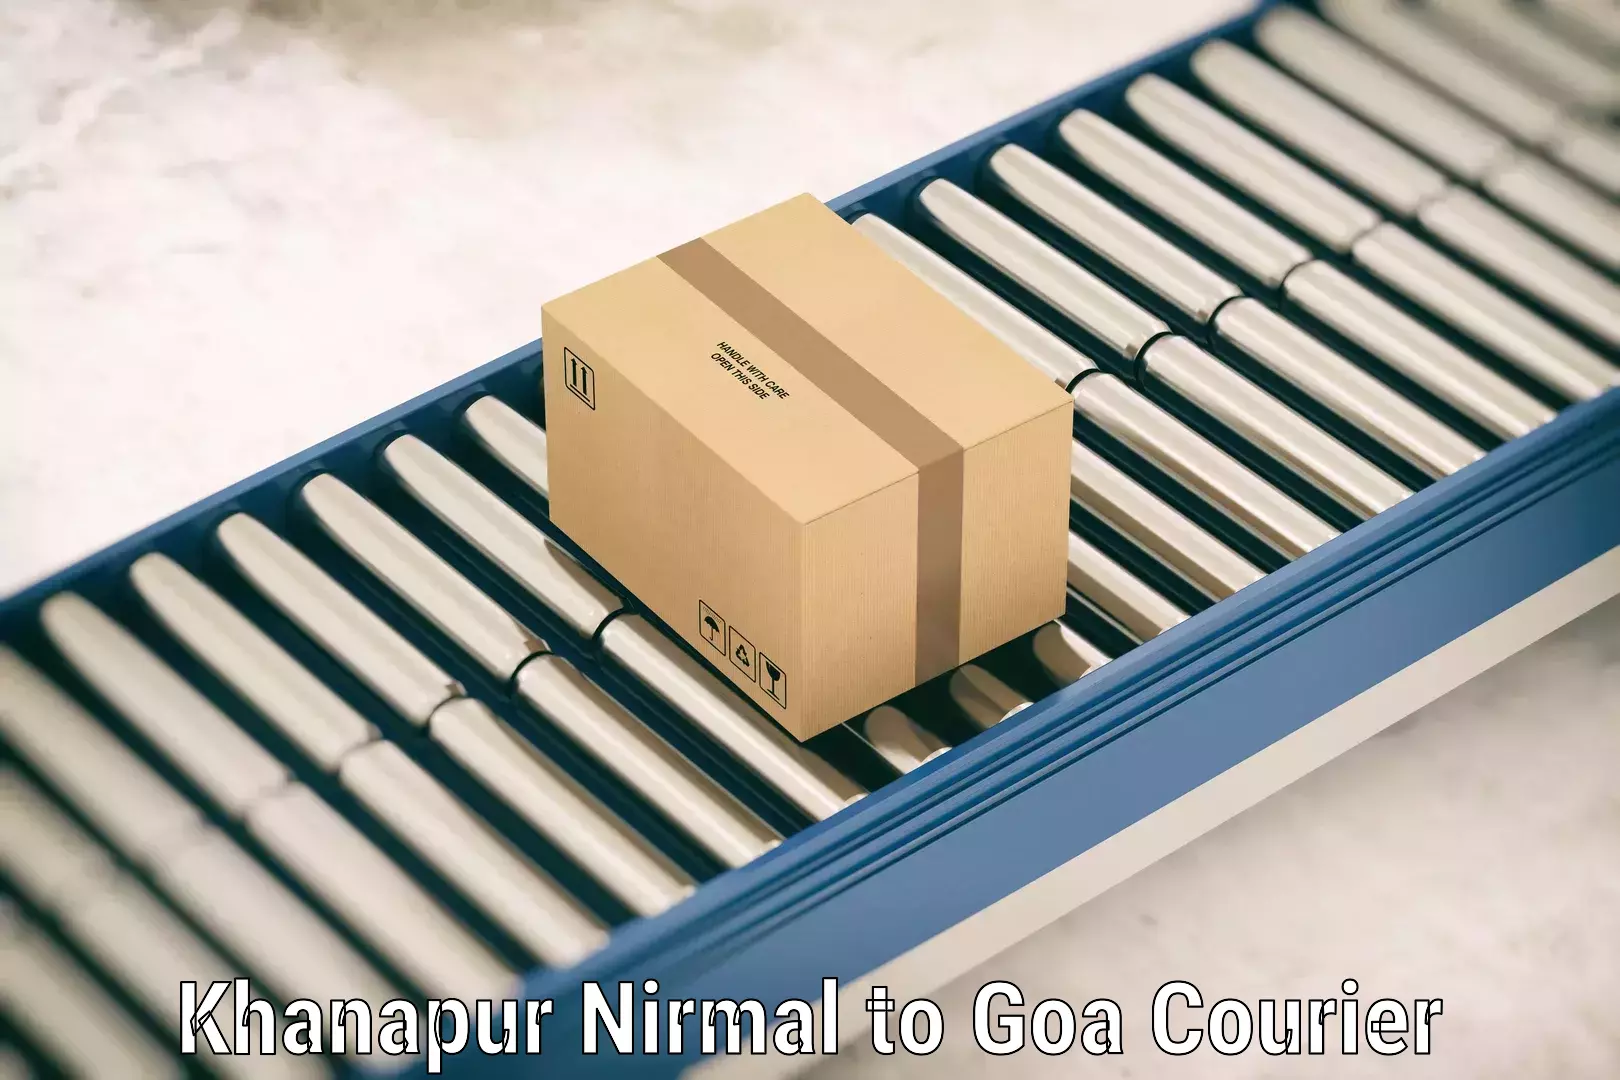 Baggage delivery support Khanapur Nirmal to South Goa